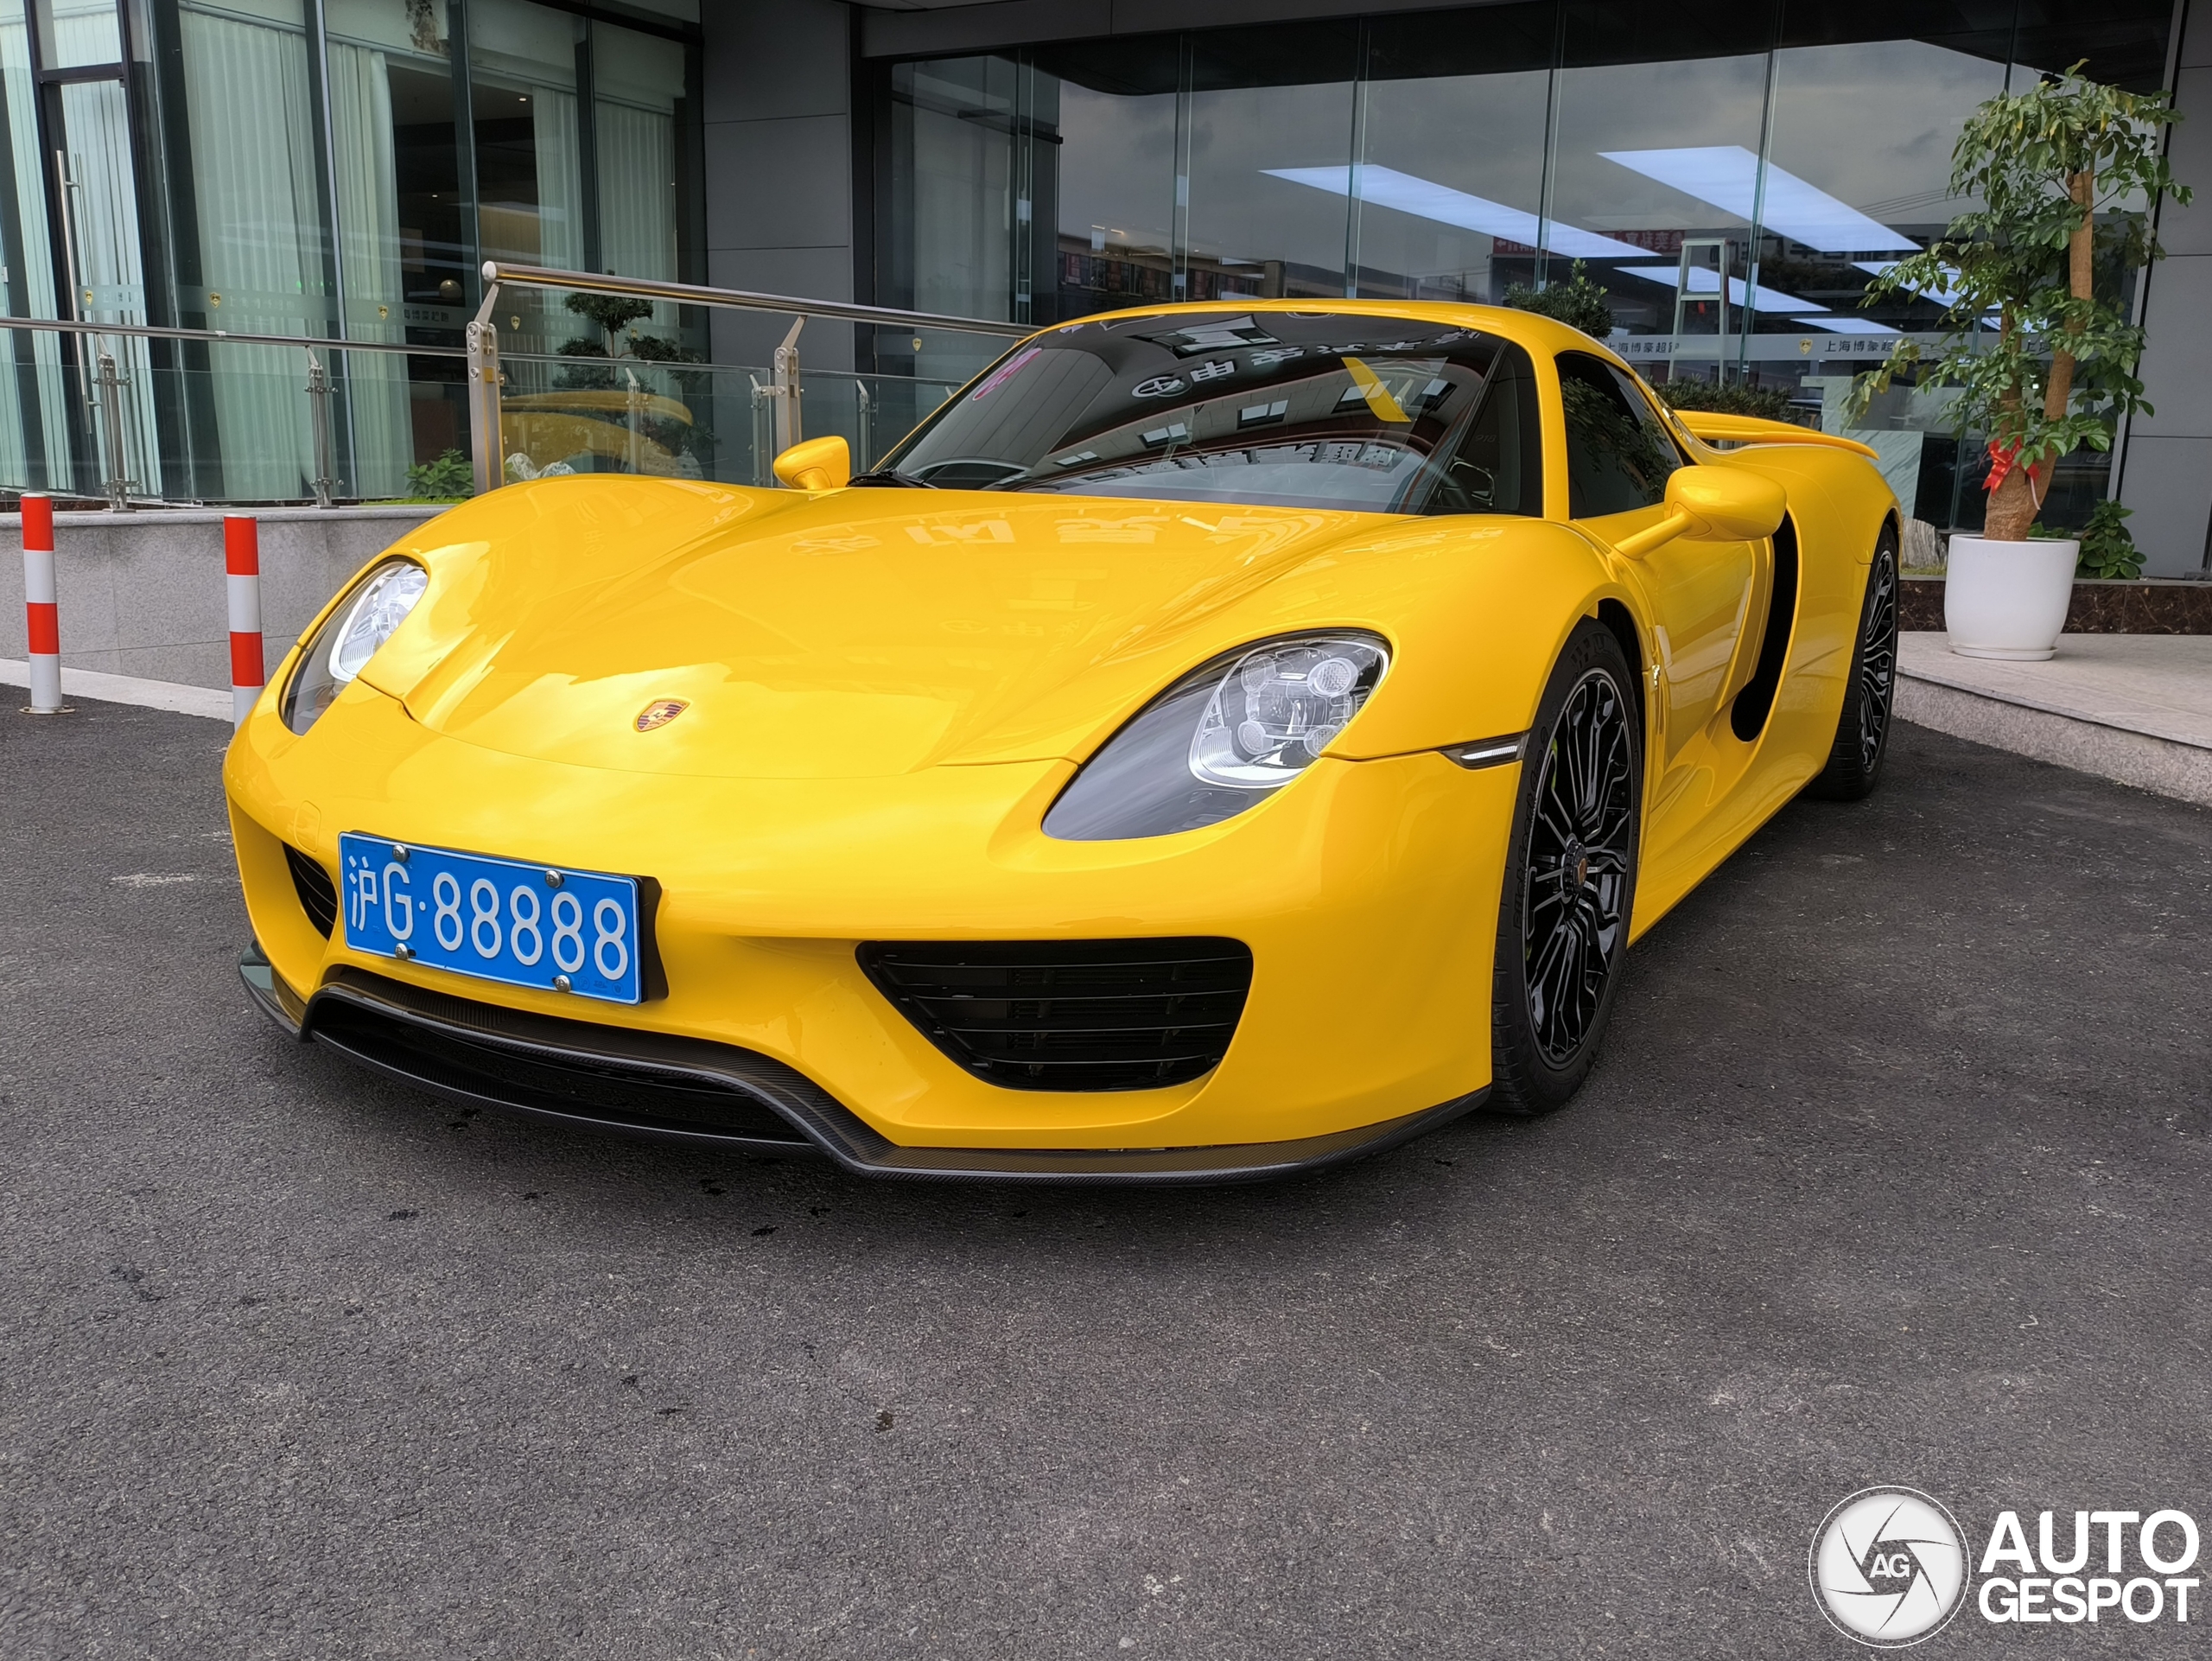 The tenth 918 from China